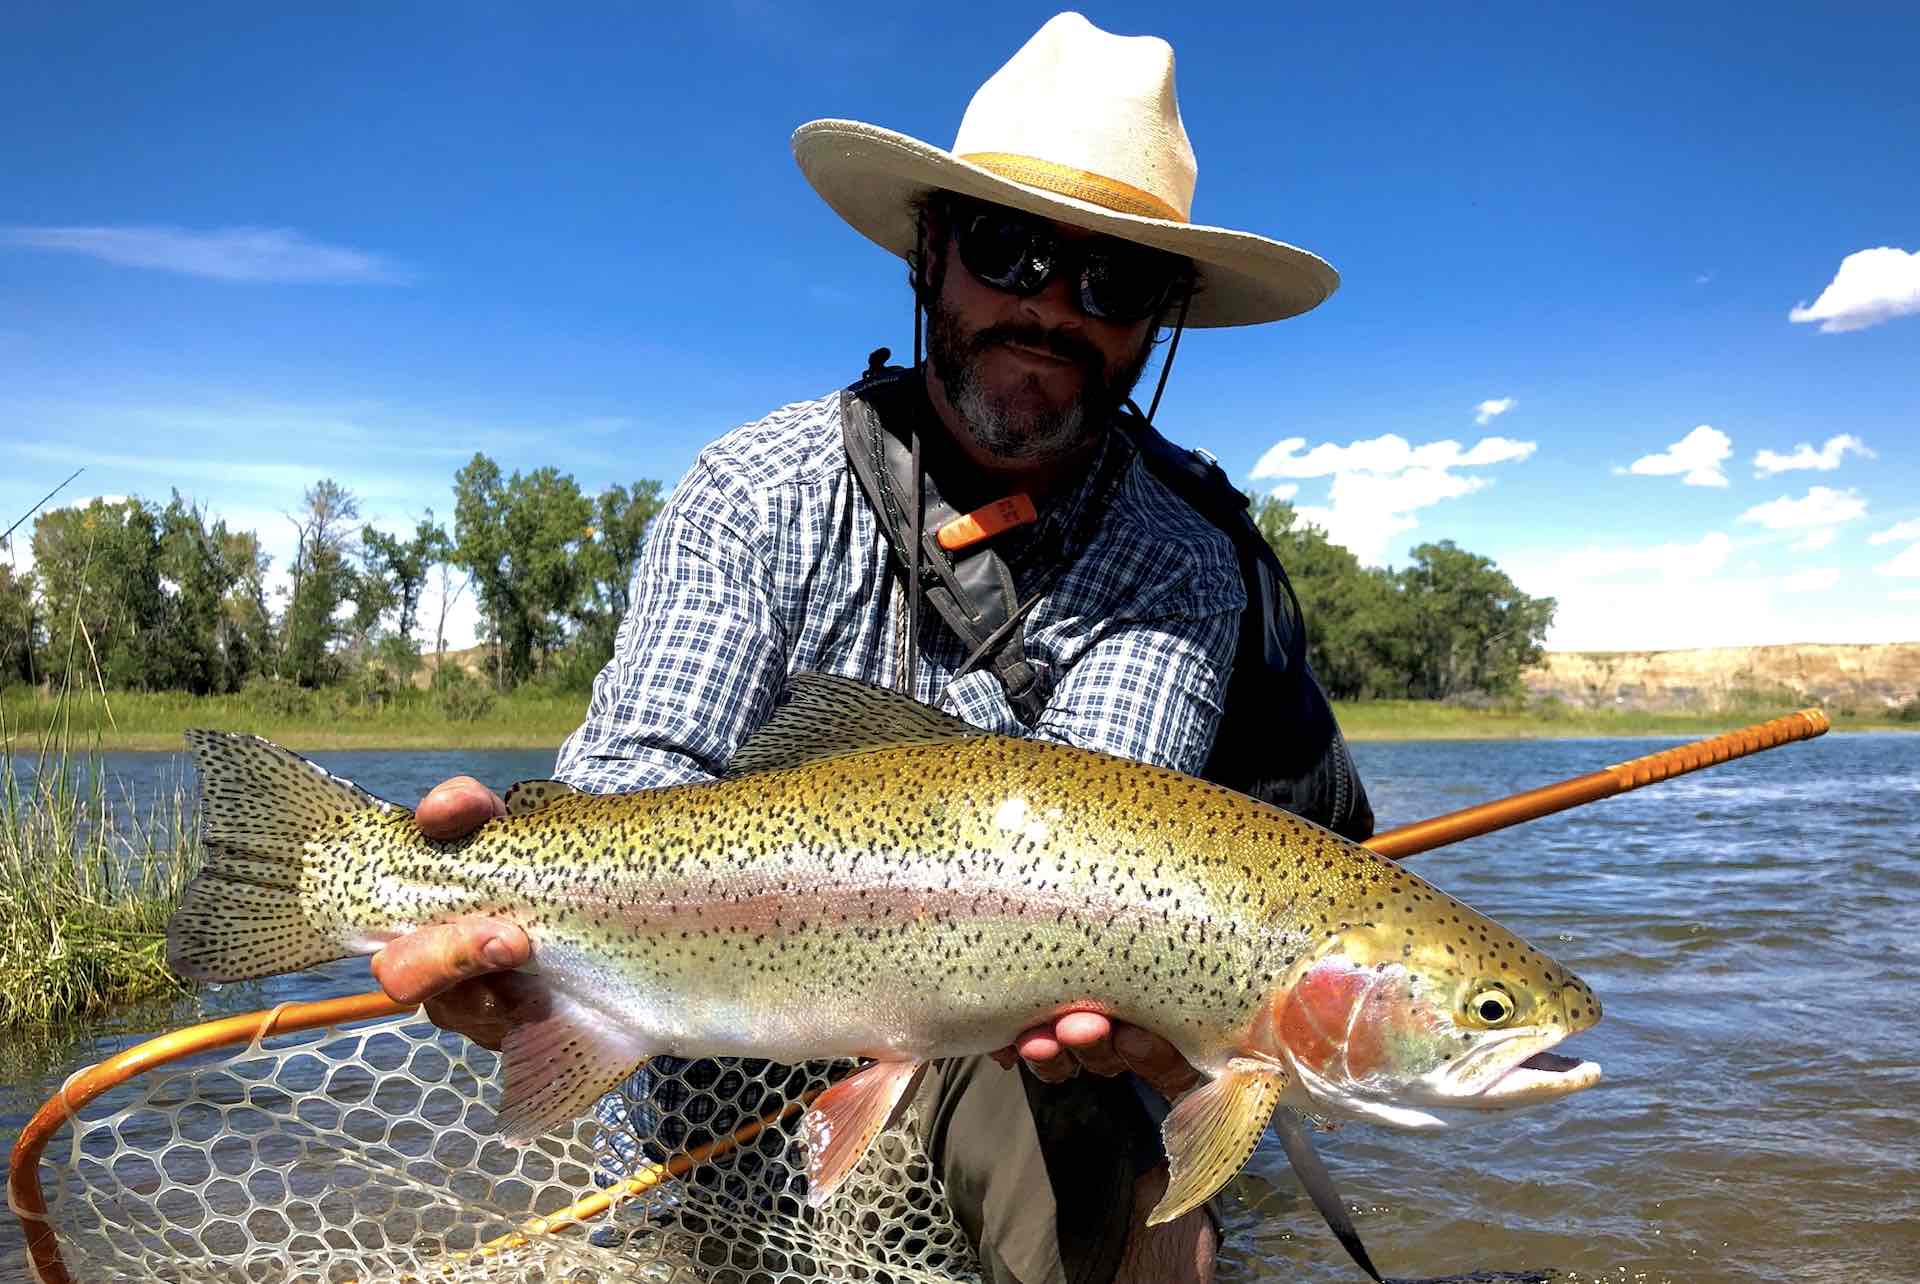 6,000 World Class Trout Per Mile Is Just the Beginning